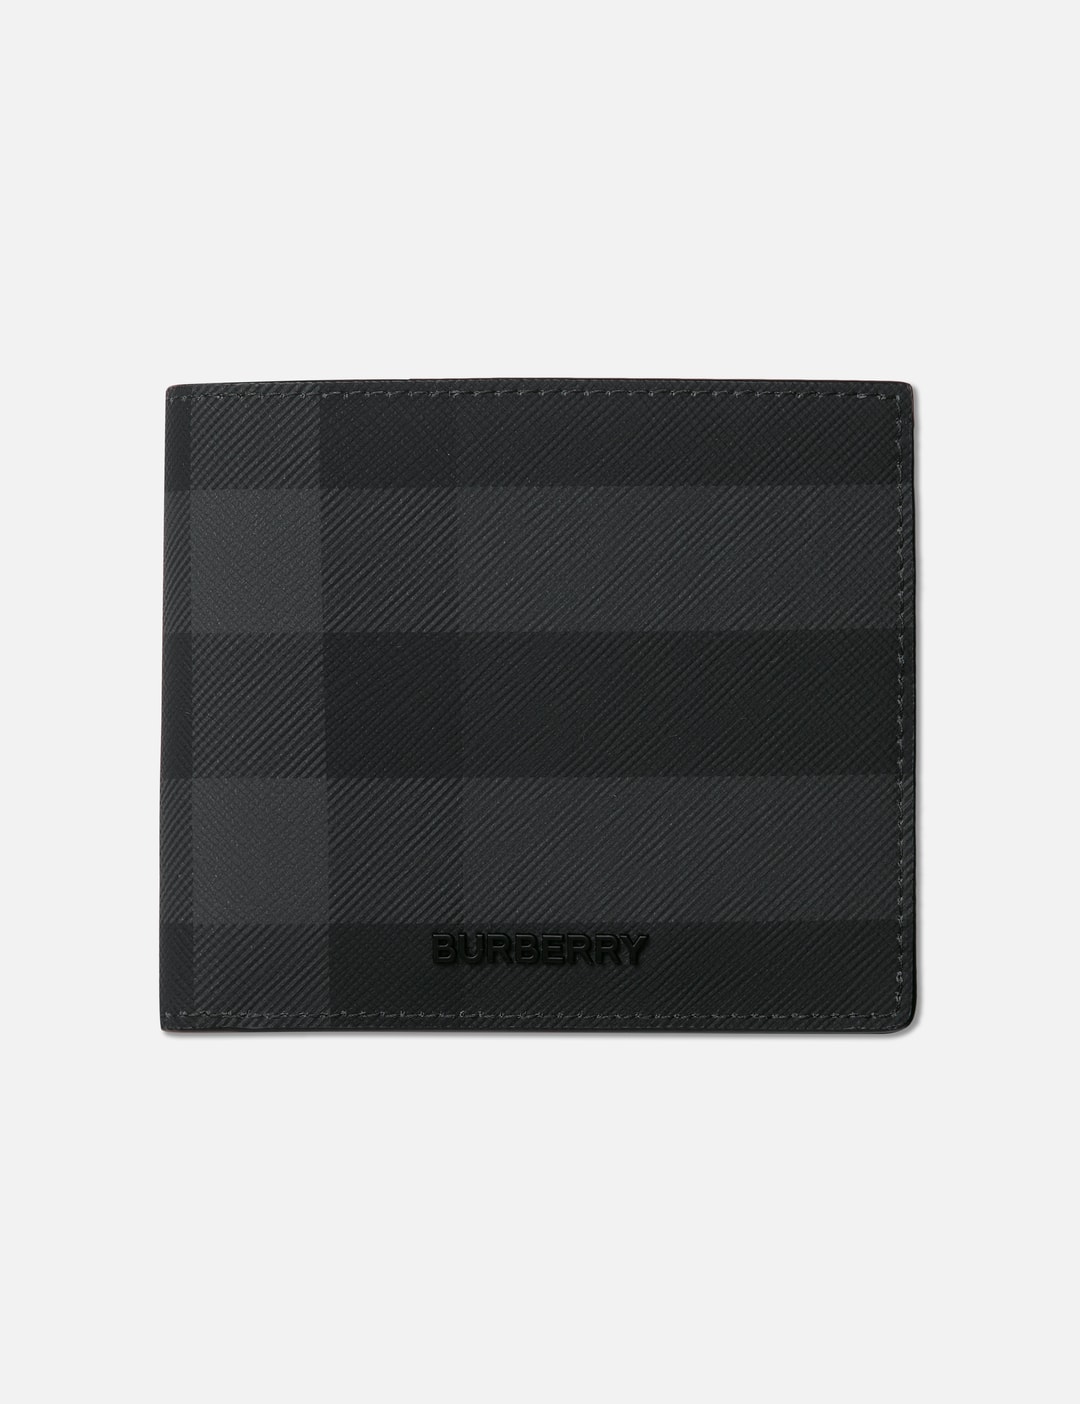 Burberry Bateman Check Embossed Leather Bifold Wallet